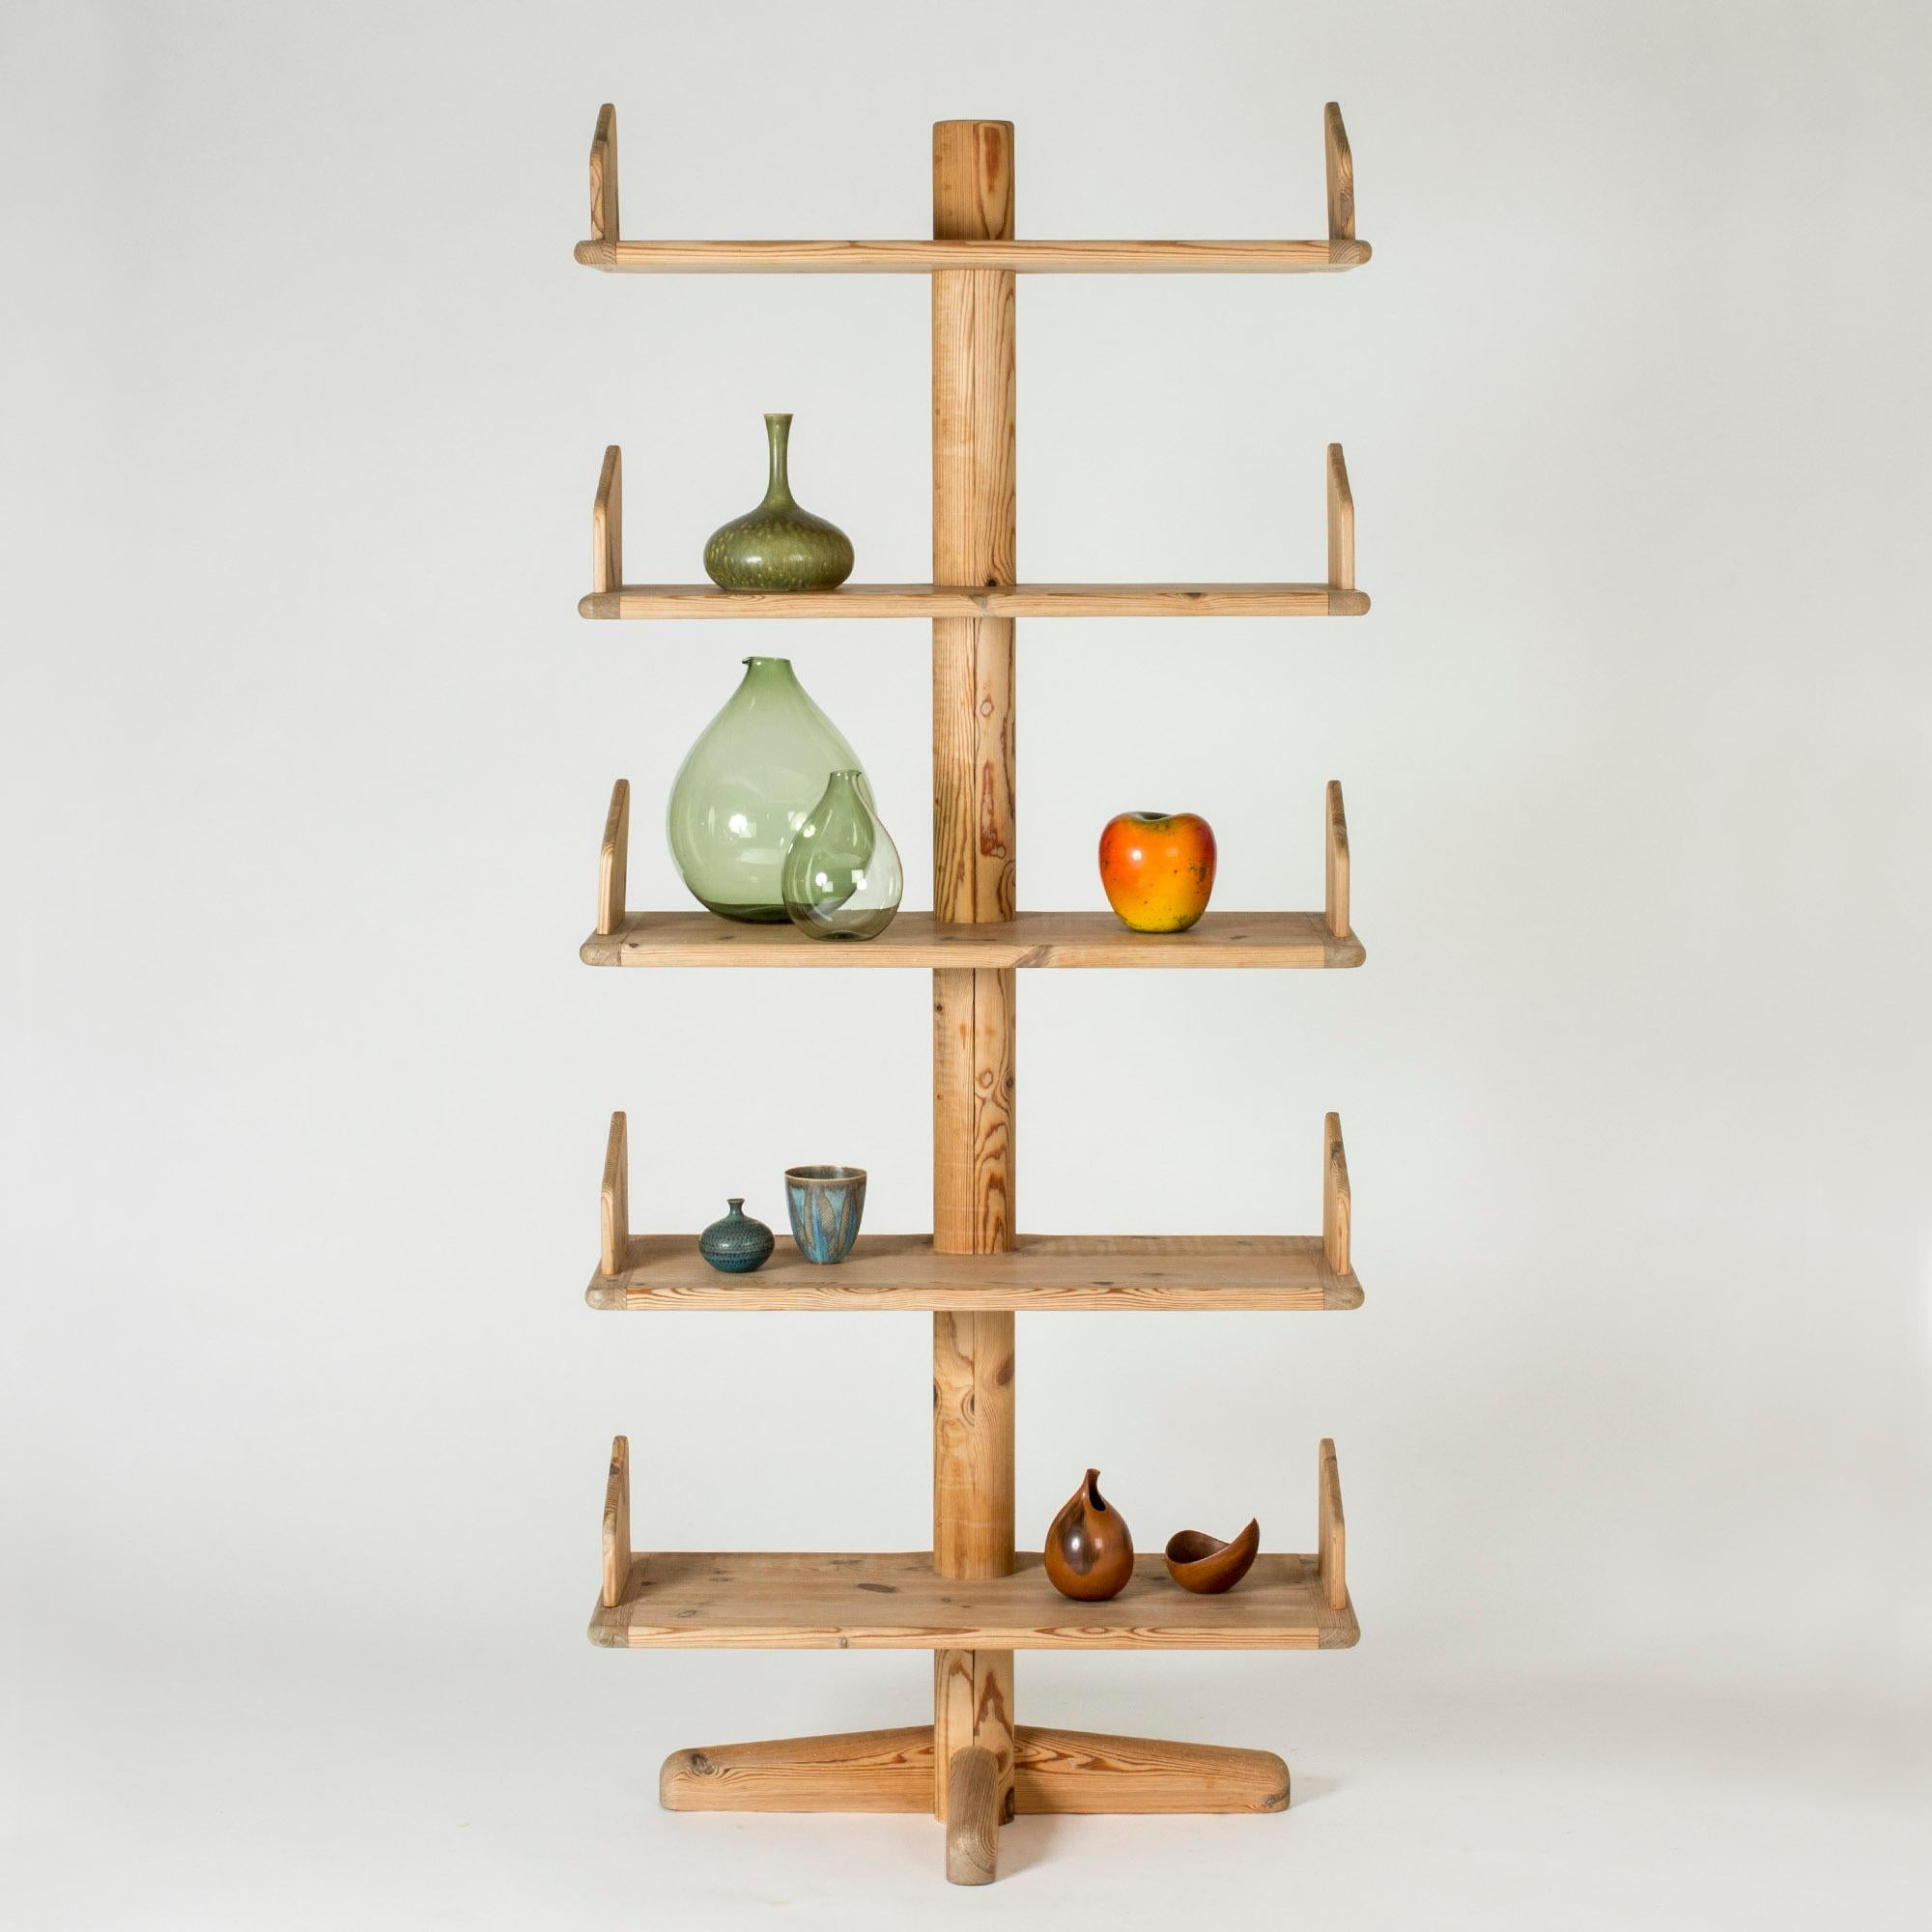 Striking Danish midcentury display shelf, made from solid pine. Rustic design with smooth lines, beautiful woodgrain.